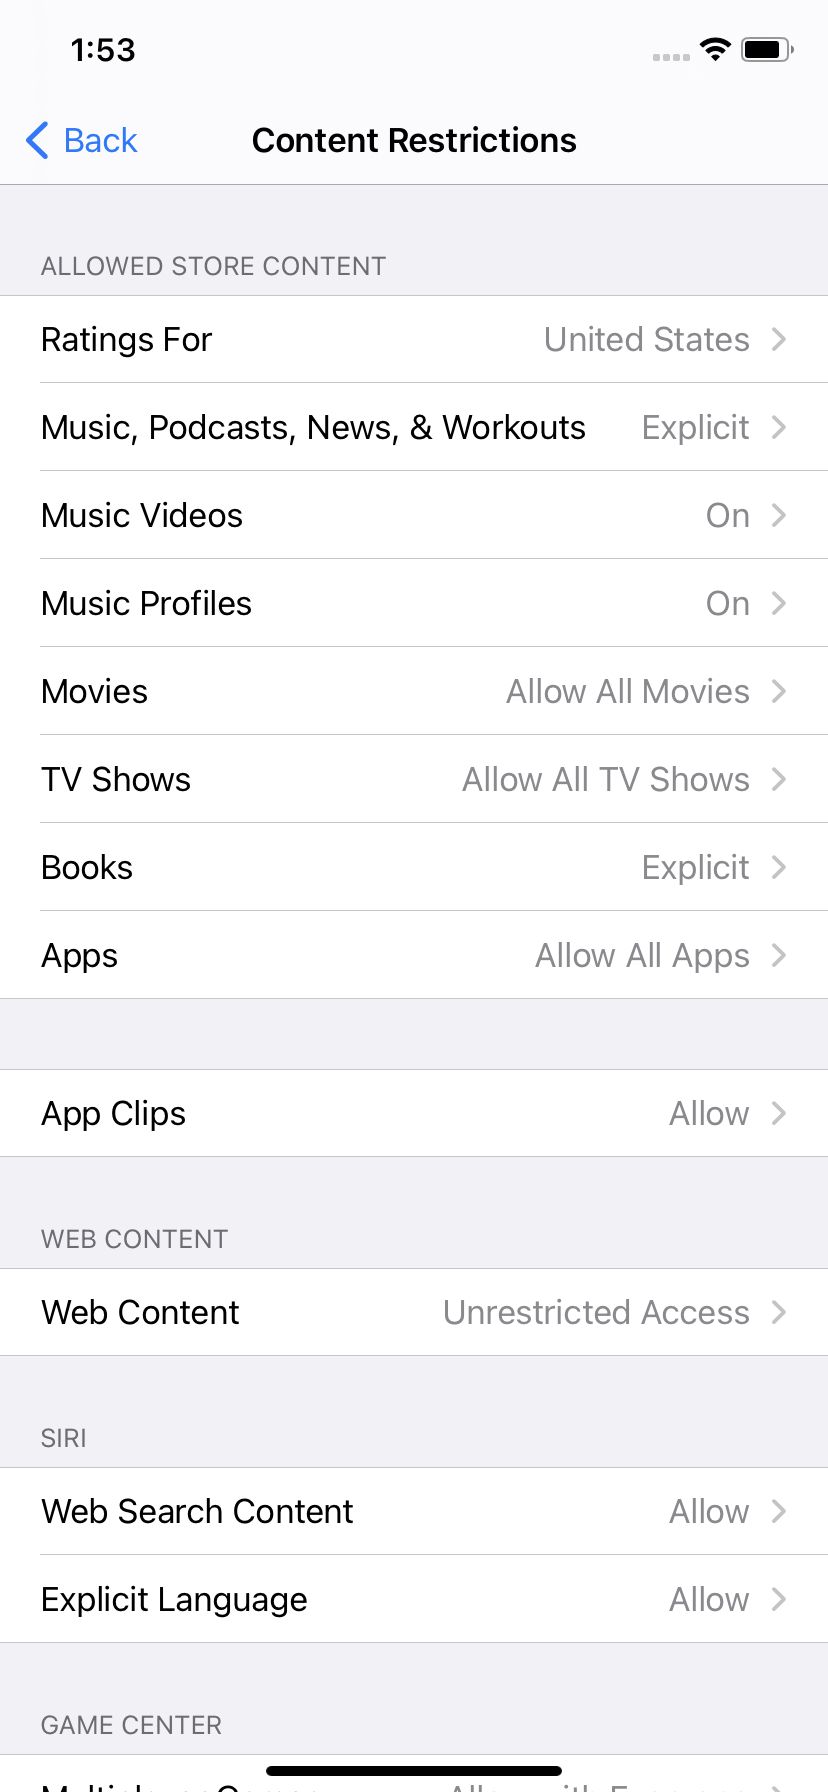 You can restrict the content of various apps based on ratings or explicitness.